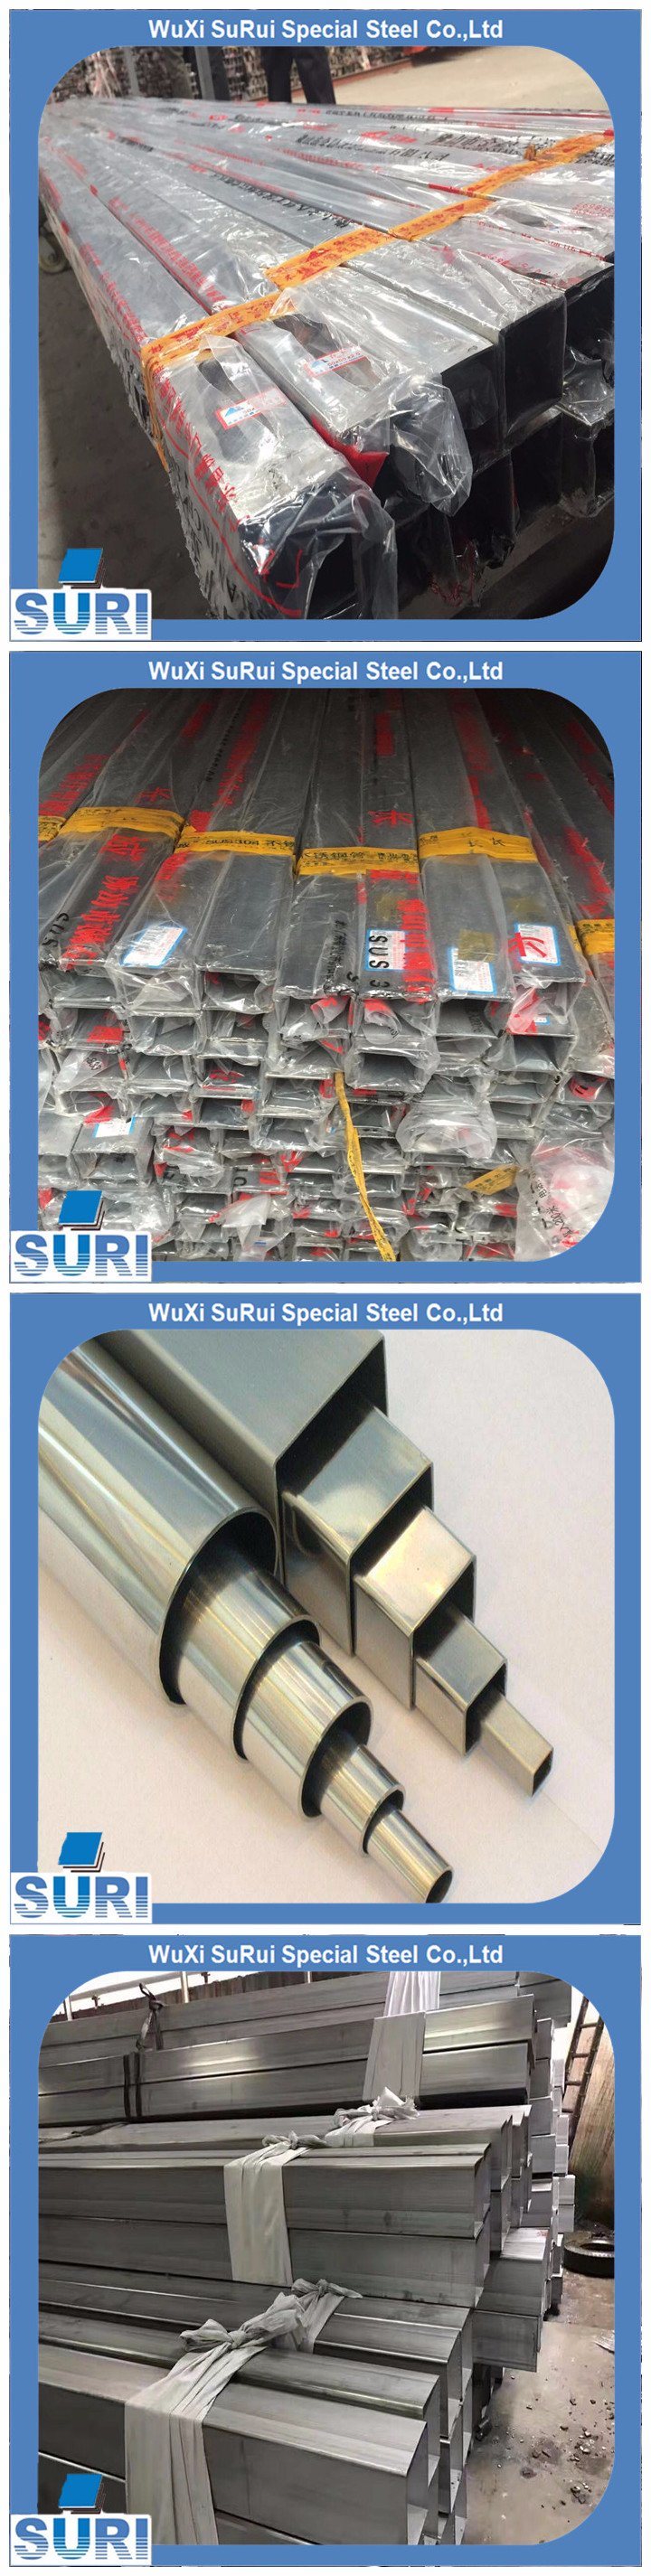 Stainless Steel Square Tube Welded Sanitary 304 Square Tube/Pipe